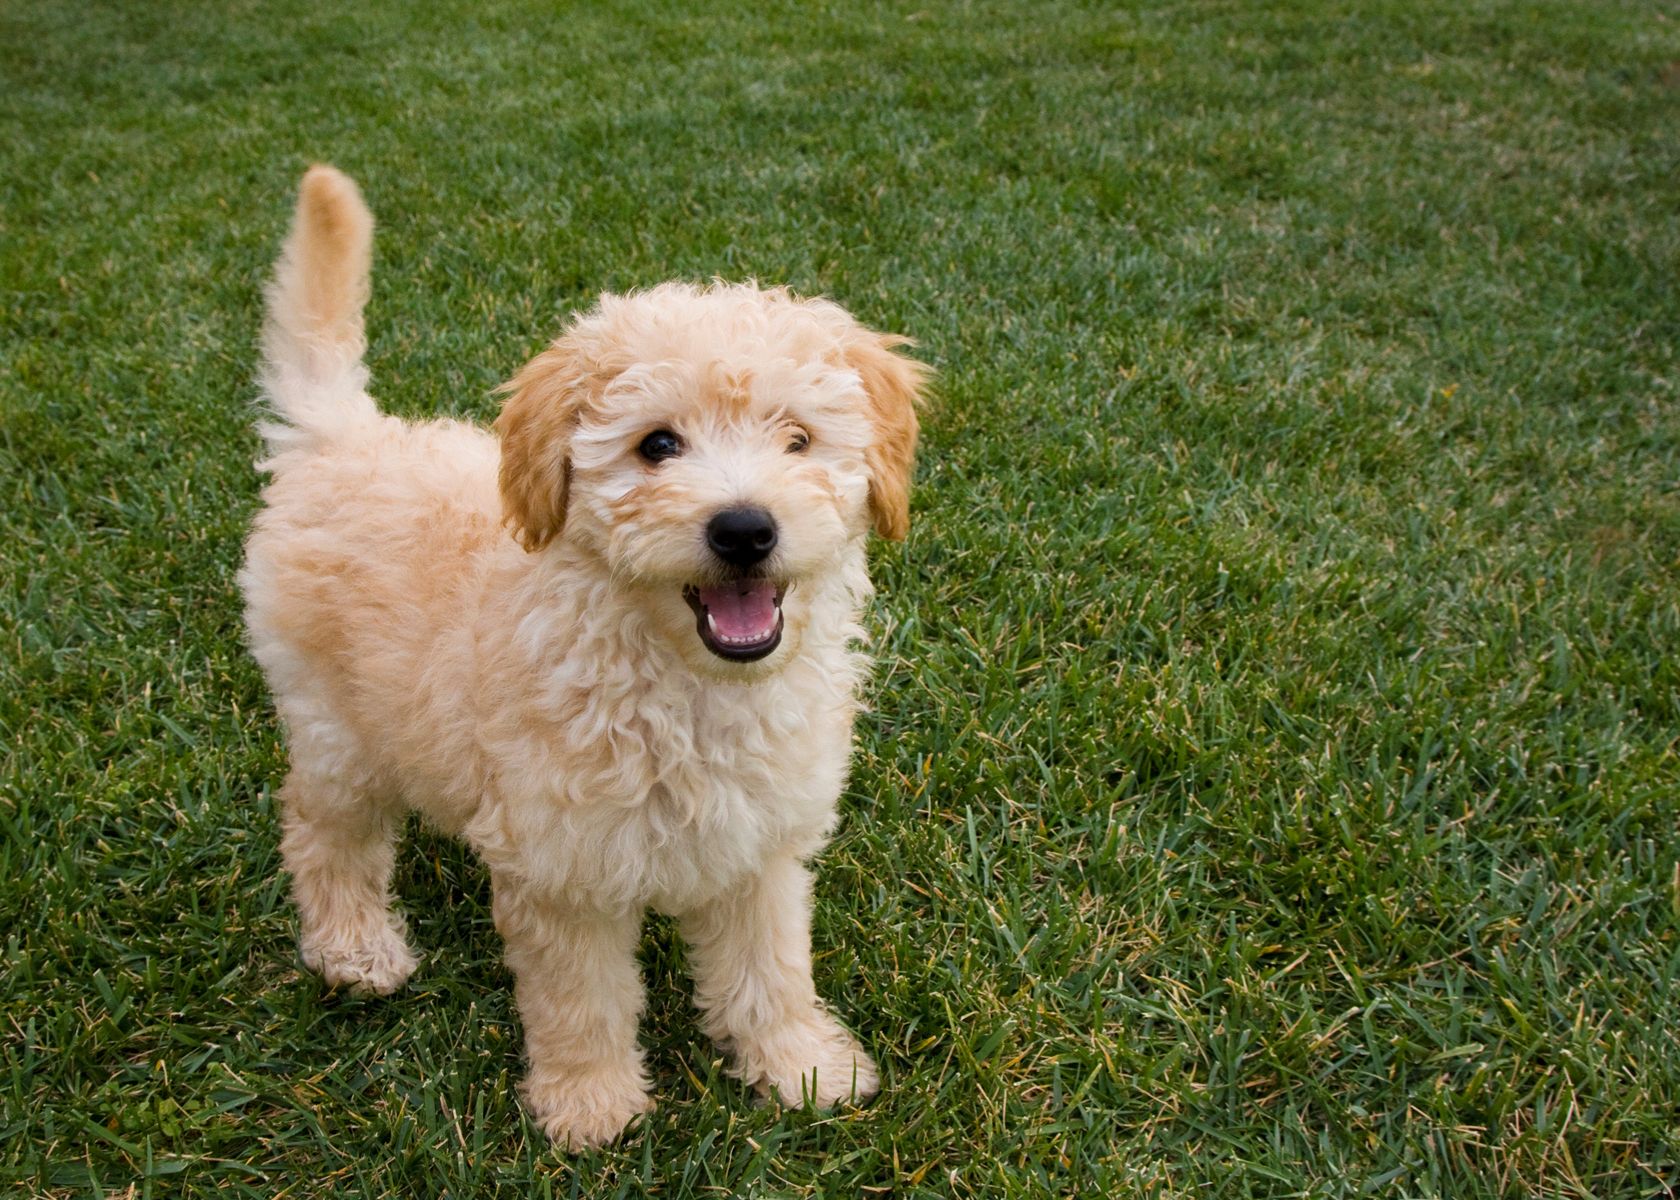 Common Health Concerns for Mini Goldendoodles